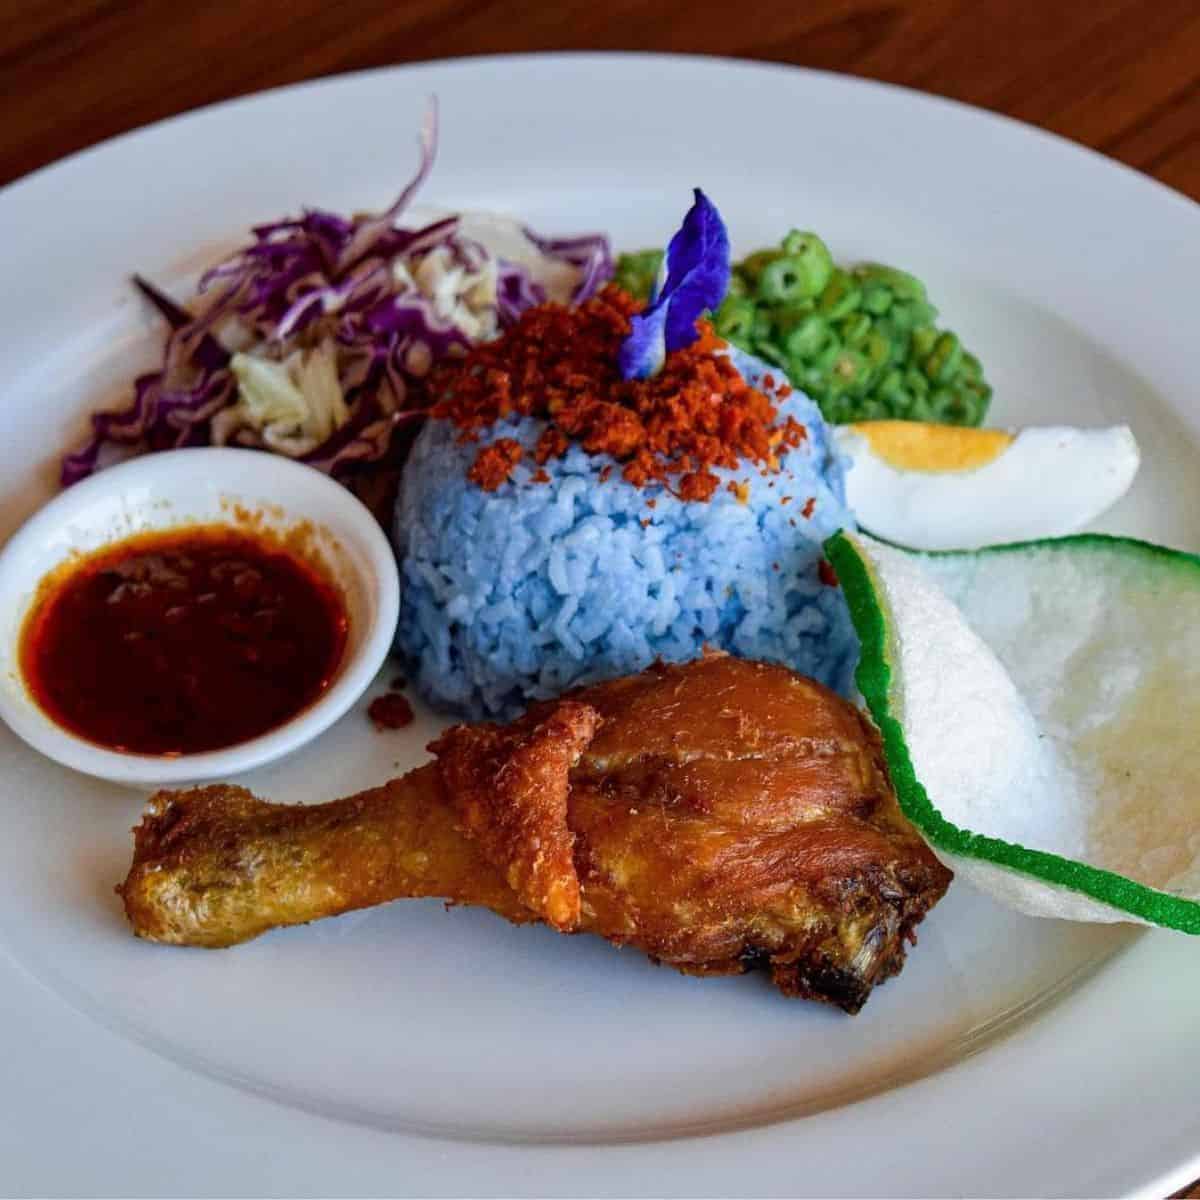 One full meal of Nasi Kerabu with fried chicken served on a white plate